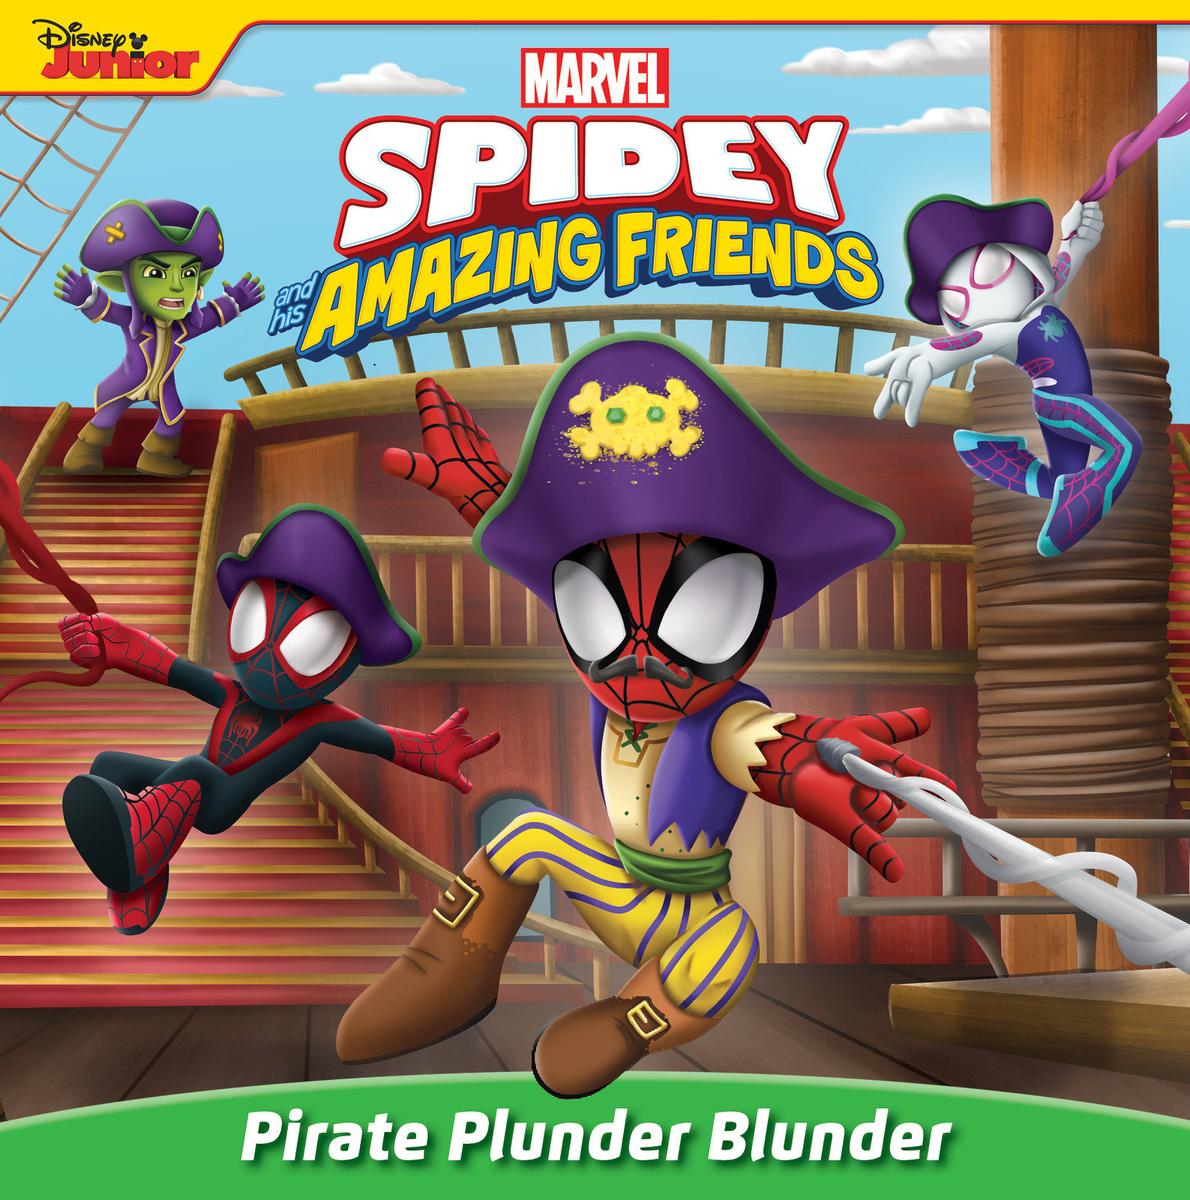 Spidey and His Amazing Friends - Pirate Plunder Blunder